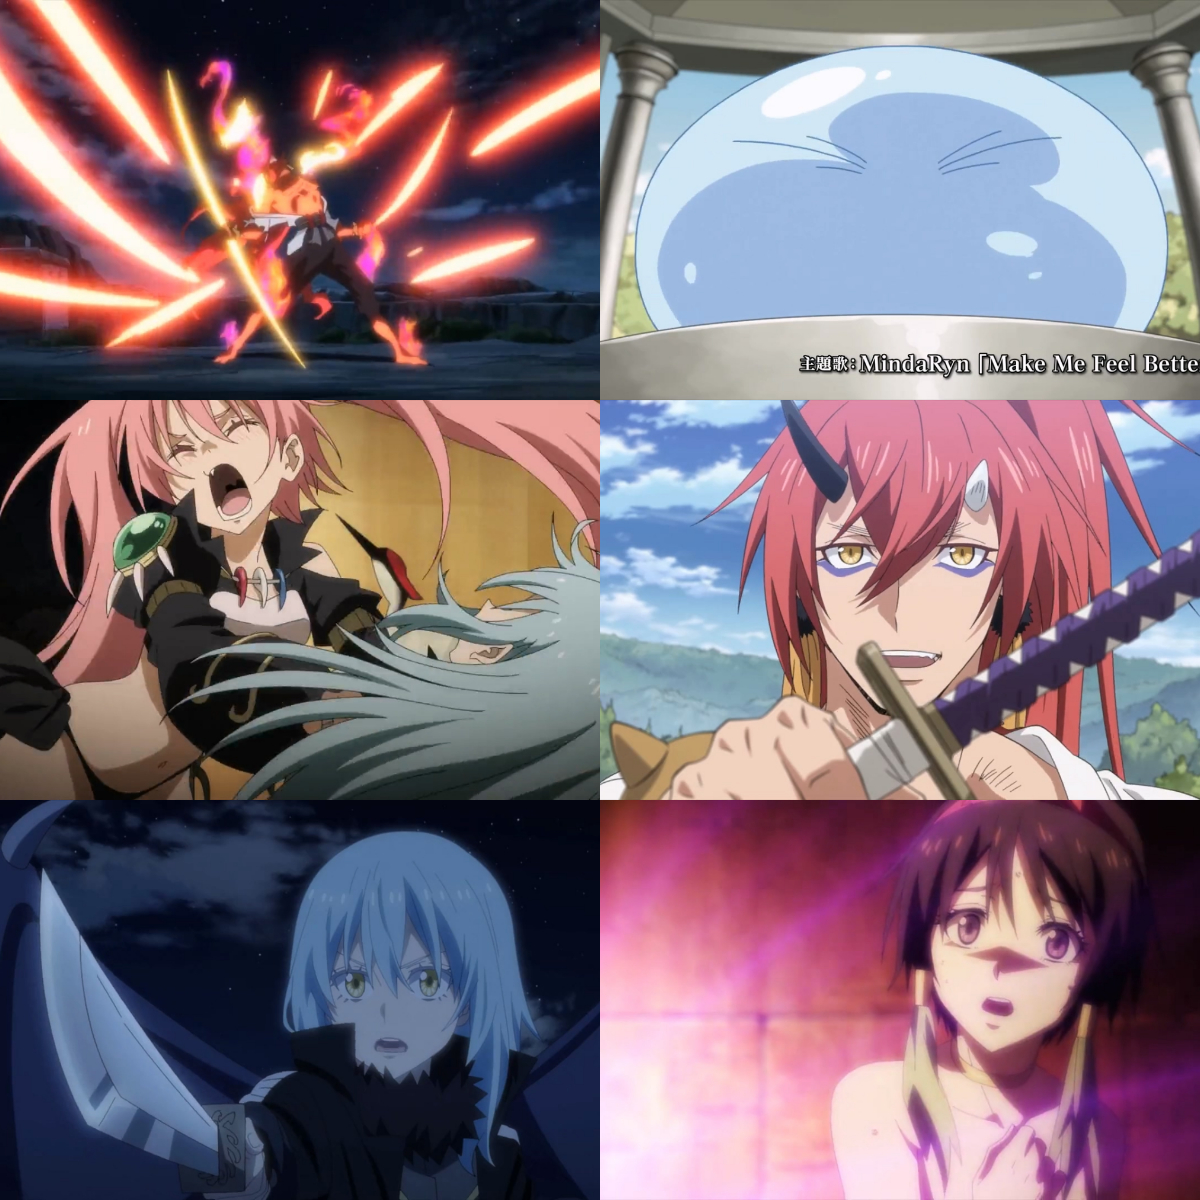 That Time I Got Reincarnated as a Slime Movie - Official Trailer 2